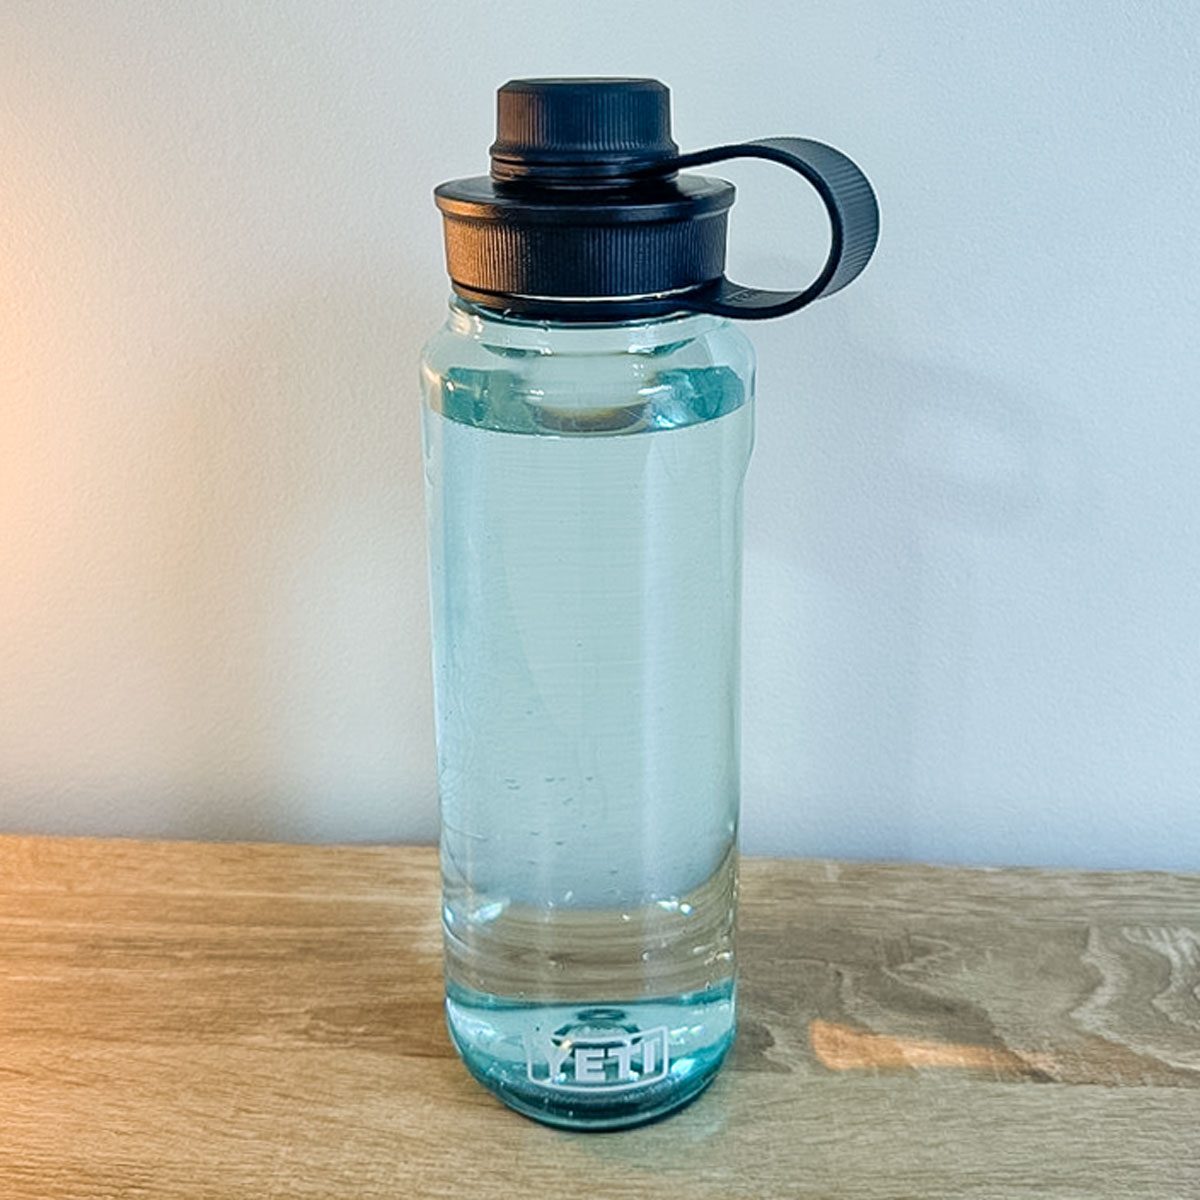 <h3>Yeti Yonder</h3> <p>The <a href="https://www.yeti.com/drinkware/bottles/yonder-25oz.html" rel="noopener">Yeti Yonder</a> is the perfect, lightweight water bottle for travel. It weighs next to nothing when empty, so you won’t notice it in a gym bag or carry-on, and it doesn’t have a straw or other parts that need deep cleaning when you’re on the go.</p> <p>"I love the chug cap for easy sipping and big gulps, and the whole thing is easy to clean quickly by hand or via the top rack of the dishwasher," says editor Mary Henn. "I like using the Yonder Tether Cap when traveling too, so the lid stays attached to the bottle and doesn’t get misplaced or lost. Without a doubt, the Yeti Yonder bottle is the one I reach for when I’m going on vacation."</p> <p>The Yonder water bottle is totally leakproof and made of BPA-free, recycled plastic. It comes in various colors and sizes ranging from 20 to 50 ounces. While it boasts the high quality we expect from <a href="https://www.familyhandyman.com/list/best-yeti-products/">Yeti products</a>, it doesn’t provide any insulation to keep ice the way double-walled stainless steel does—it’s truly made to be ultra-lightweight—but this durable water bottle is perfect for traveling and on-the-go purposes.</p> <p><strong>Size(s):</strong> 20 oz., 25 oz., 34 oz., 50 oz. <strong>| Lid(s):</strong> Twist Top, Compatible with <a href="https://www.yeti.com/drinkware/drinkware-accessories/21070100013.html" rel="noopener">Straw Cap</a> (sold separately) |<strong> Dishwasher Safe: </strong>Yes<strong> | Material:</strong> 50% Recycled Plastic<strong> | Hot Liquids: </strong>No</p> <p><strong>Pros</strong></p> <ul> <li>Lightweight</li> <li>Durable</li> <li>Great for travel, especially air travel</li> <li>Affordable</li> <li>Available in a variety of colors and sizes</li> <li>Easy to clean and dishwasher-safe</li> </ul> <p><strong>Cons</strong></p> <ul> <li><span>Lightweight plastic doesn’t provide insulation</span></li> </ul> <p class="listicle-page__cta-button-shop"><a class="shop-btn" href="https://www.yeti.com/drinkware/bottles/yonder-25oz.html">Shop on Yeti</a></p> <p class="listicle-page__cta-button-shop"><a class="shop-btn" href="https://www.amazon.com/YETI-Yonder-Water-Bottle-Charcoal/dp/B0BTTW1GJK">Shop on Amazon</a></p> <p class="listicle-page__cta-button-shop"><a class="shop-btn" href="https://www.llbean.com/llb/shop/128653">Shop on L.L. Bean</a></p>